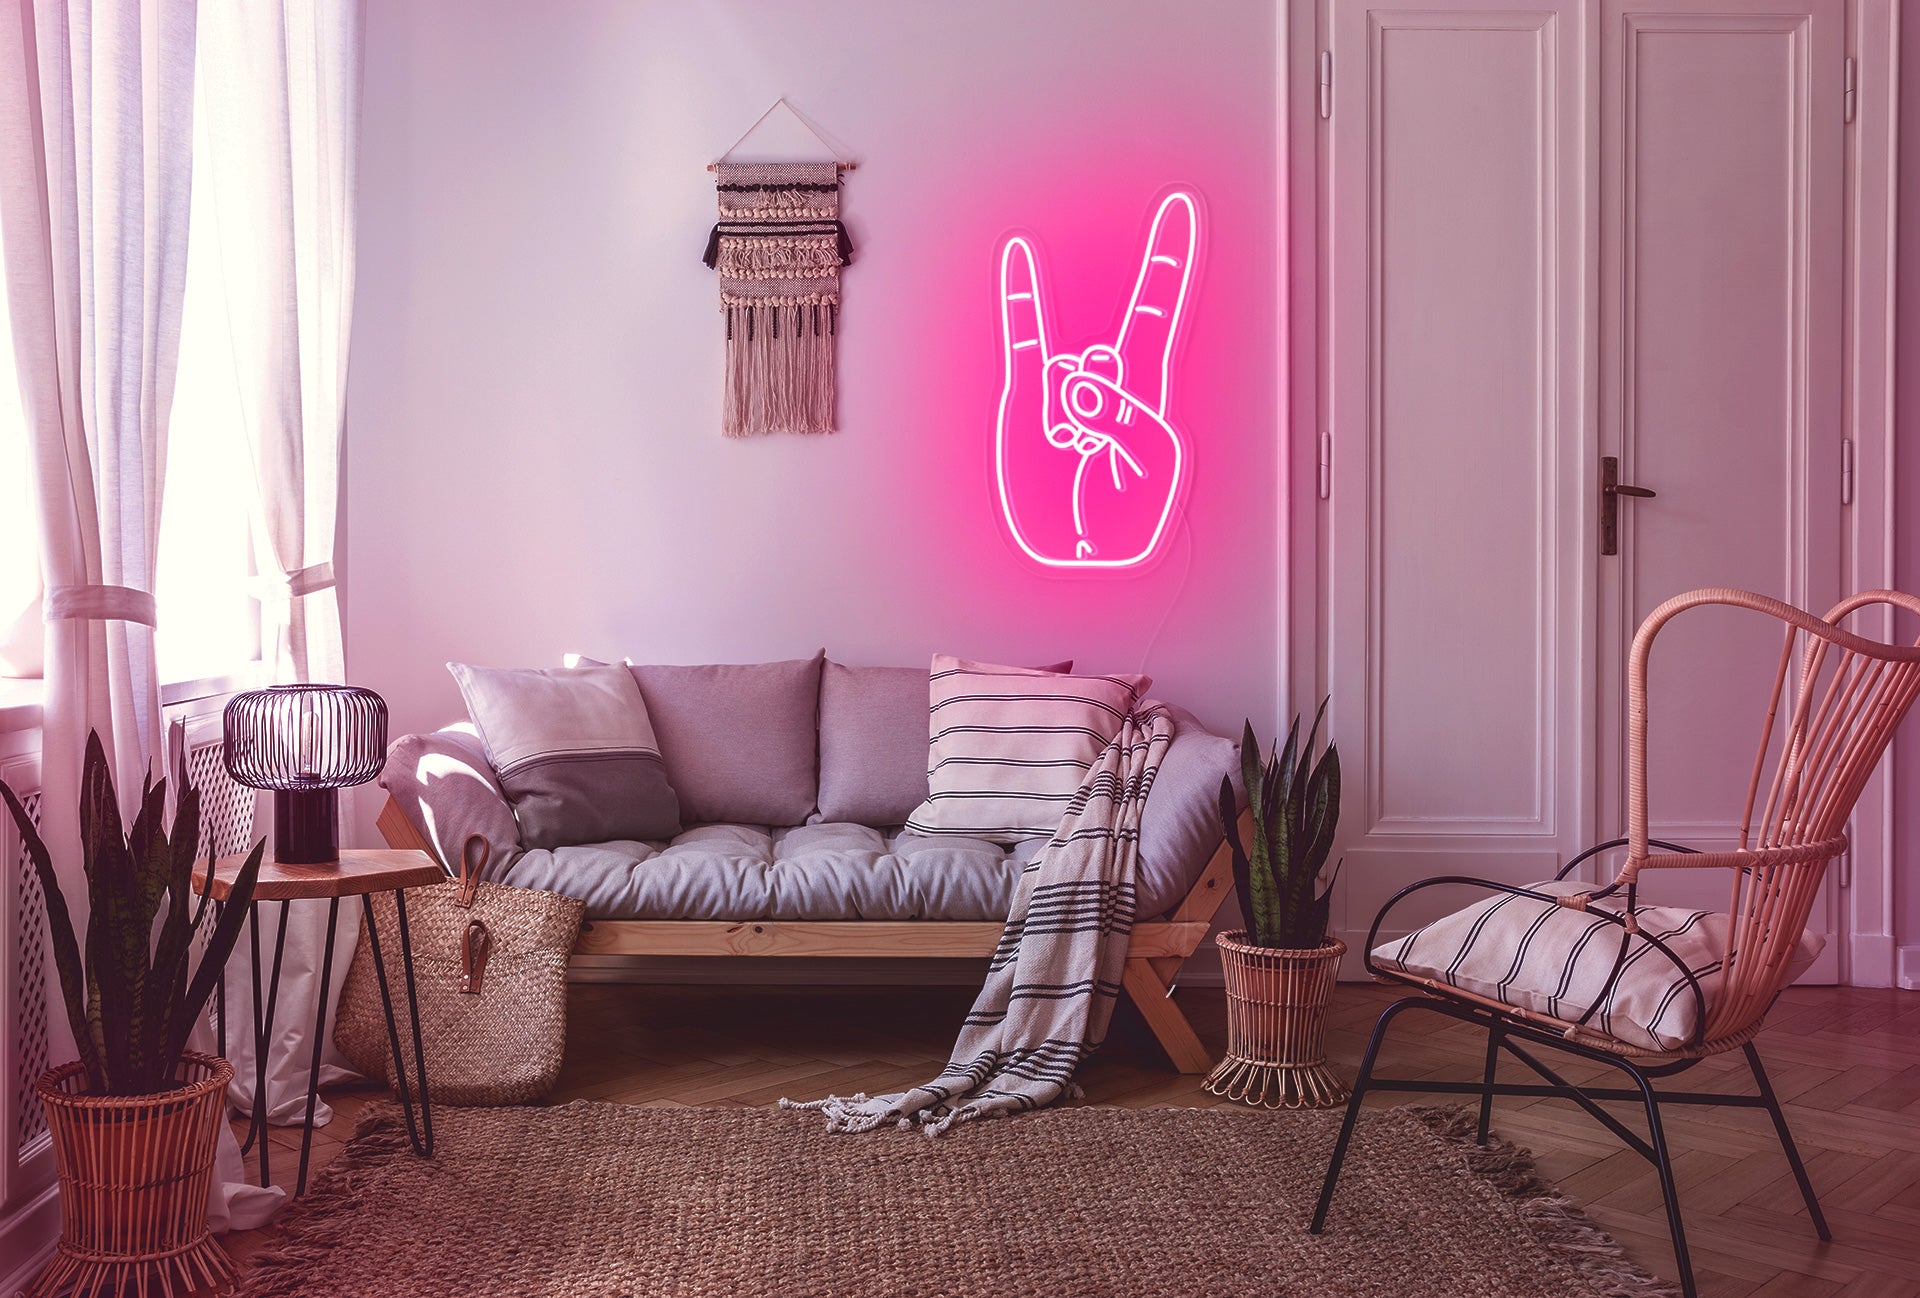 Rock 'Love you' Neon sign